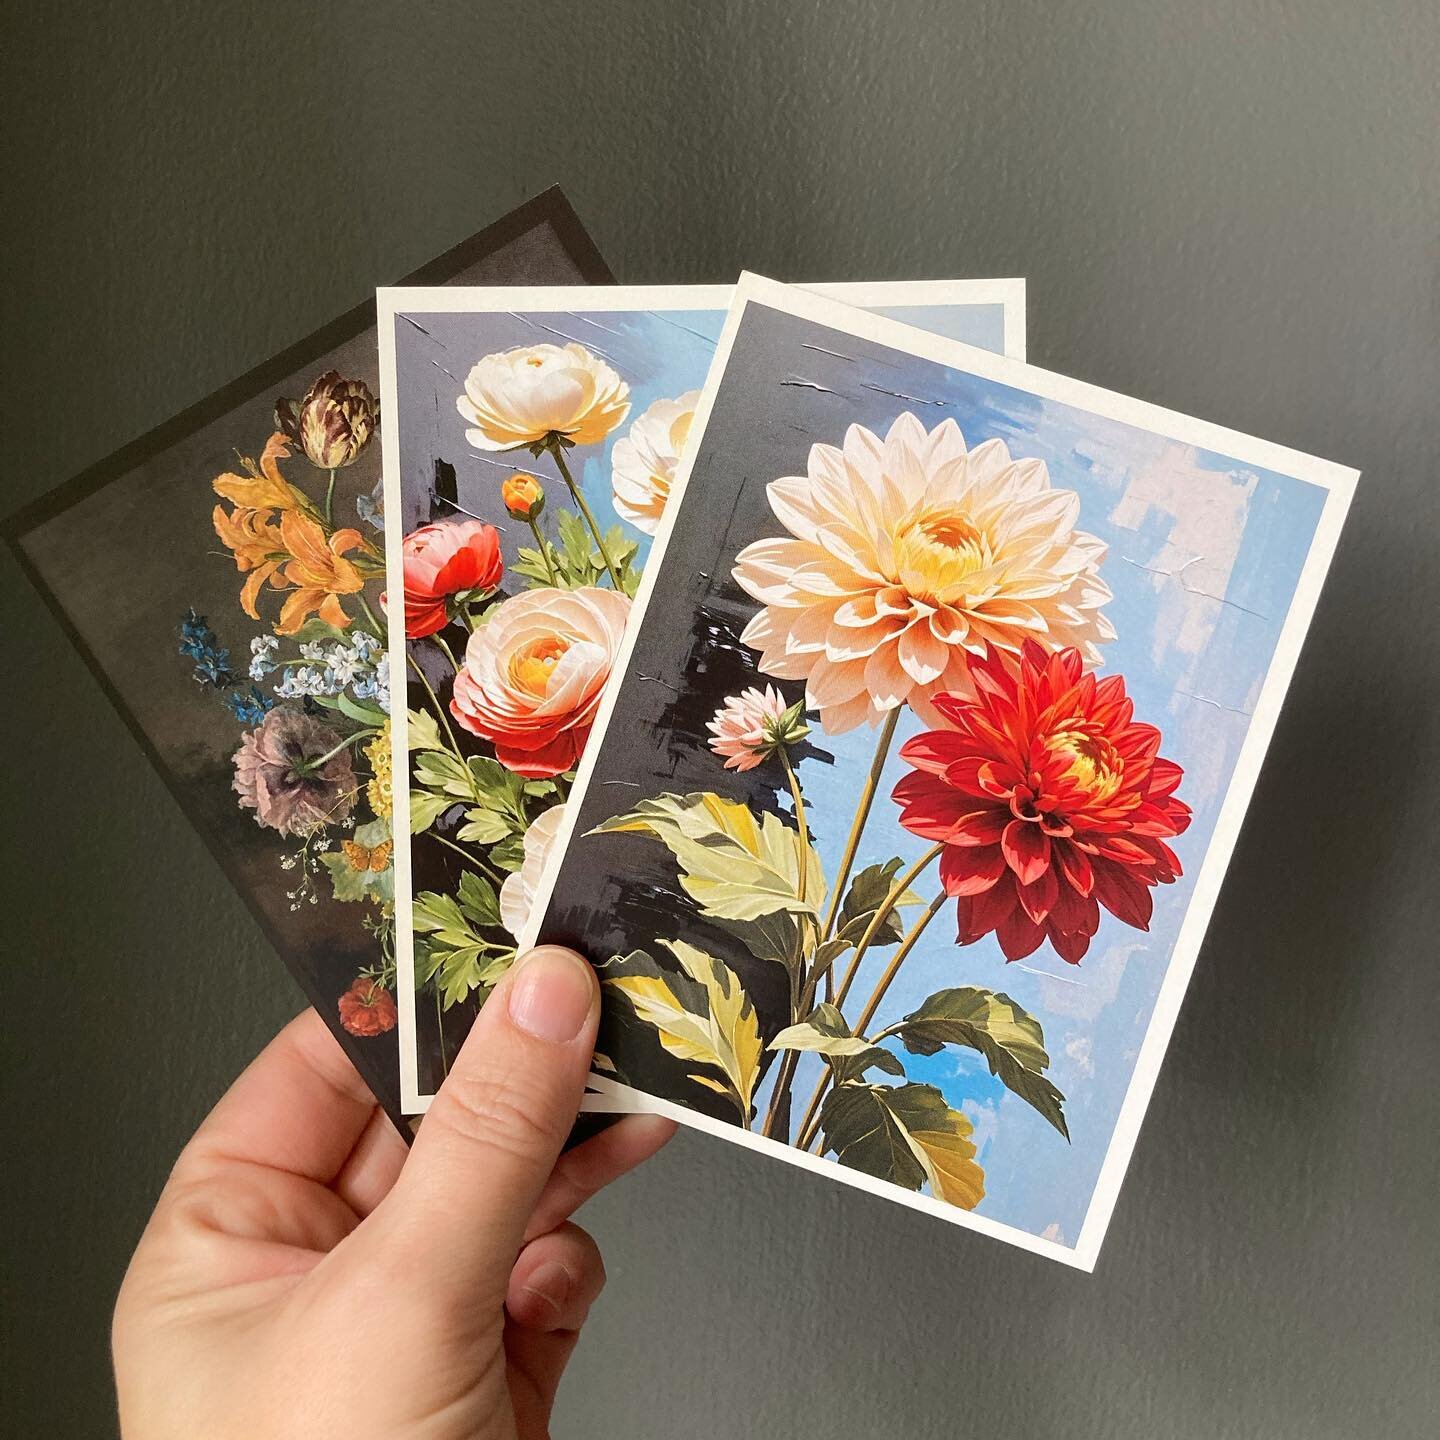 Our postcards just arrived! Our bouquet subscriptions make a lovely gift. Each order comes with a corresponding post card and note card that you can personalize for your loved one. Just a little reminder of what they have to look forward to ☀️